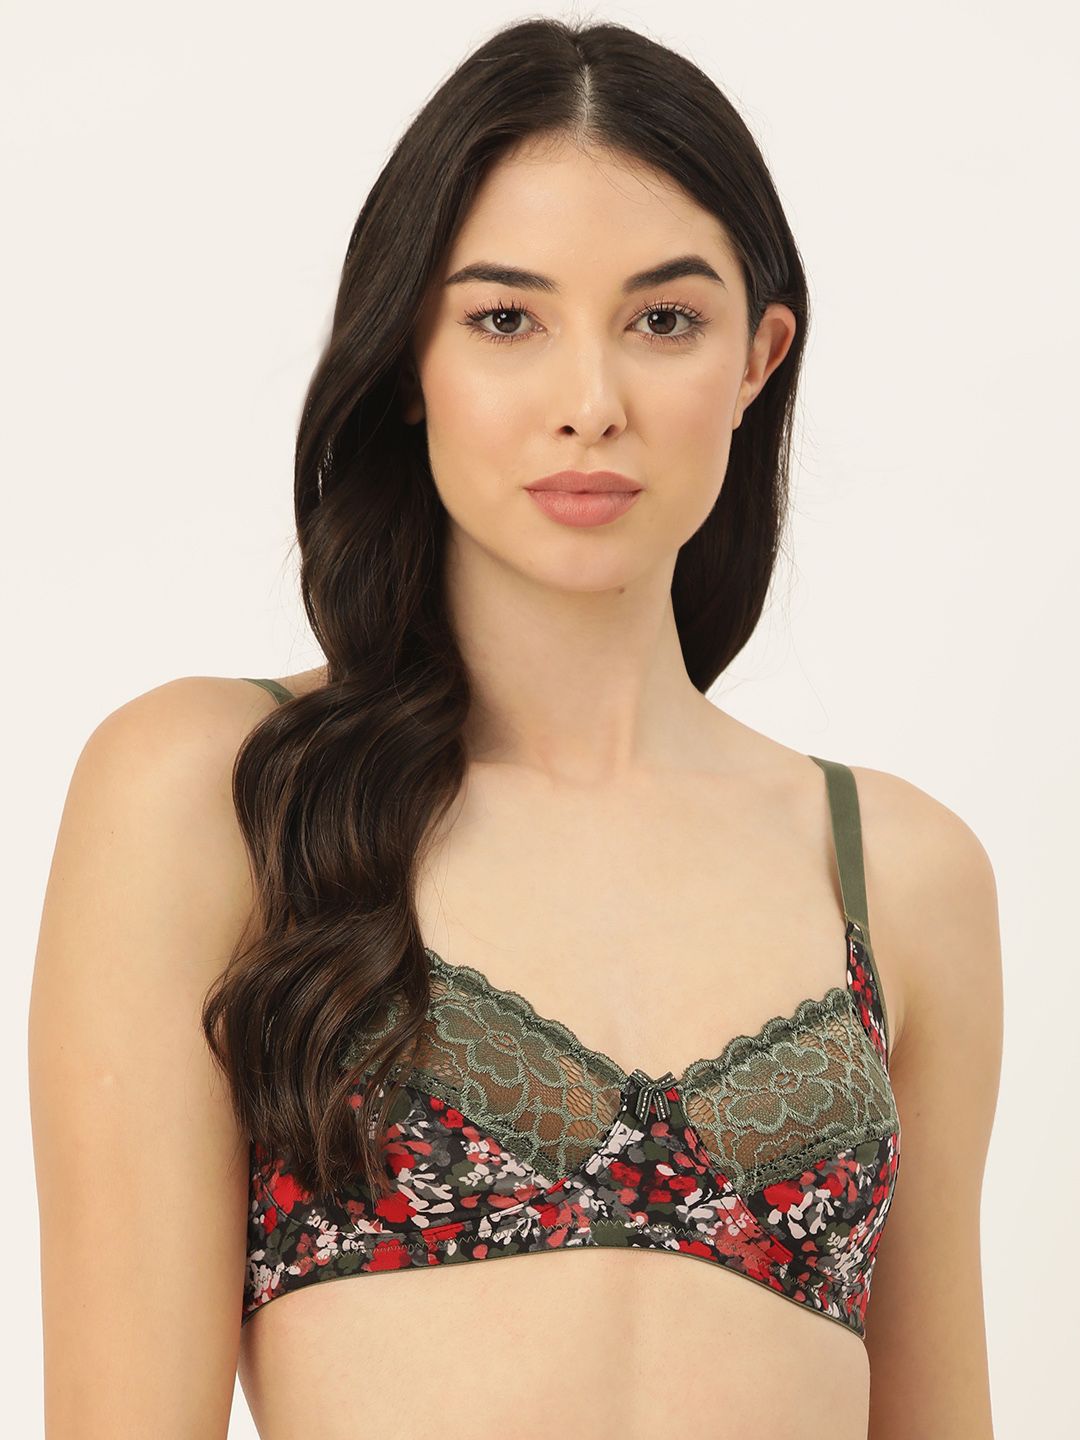 Buy Quttos PrettyCat Padded Lace Tshirt Bra Floral Bra Pink at